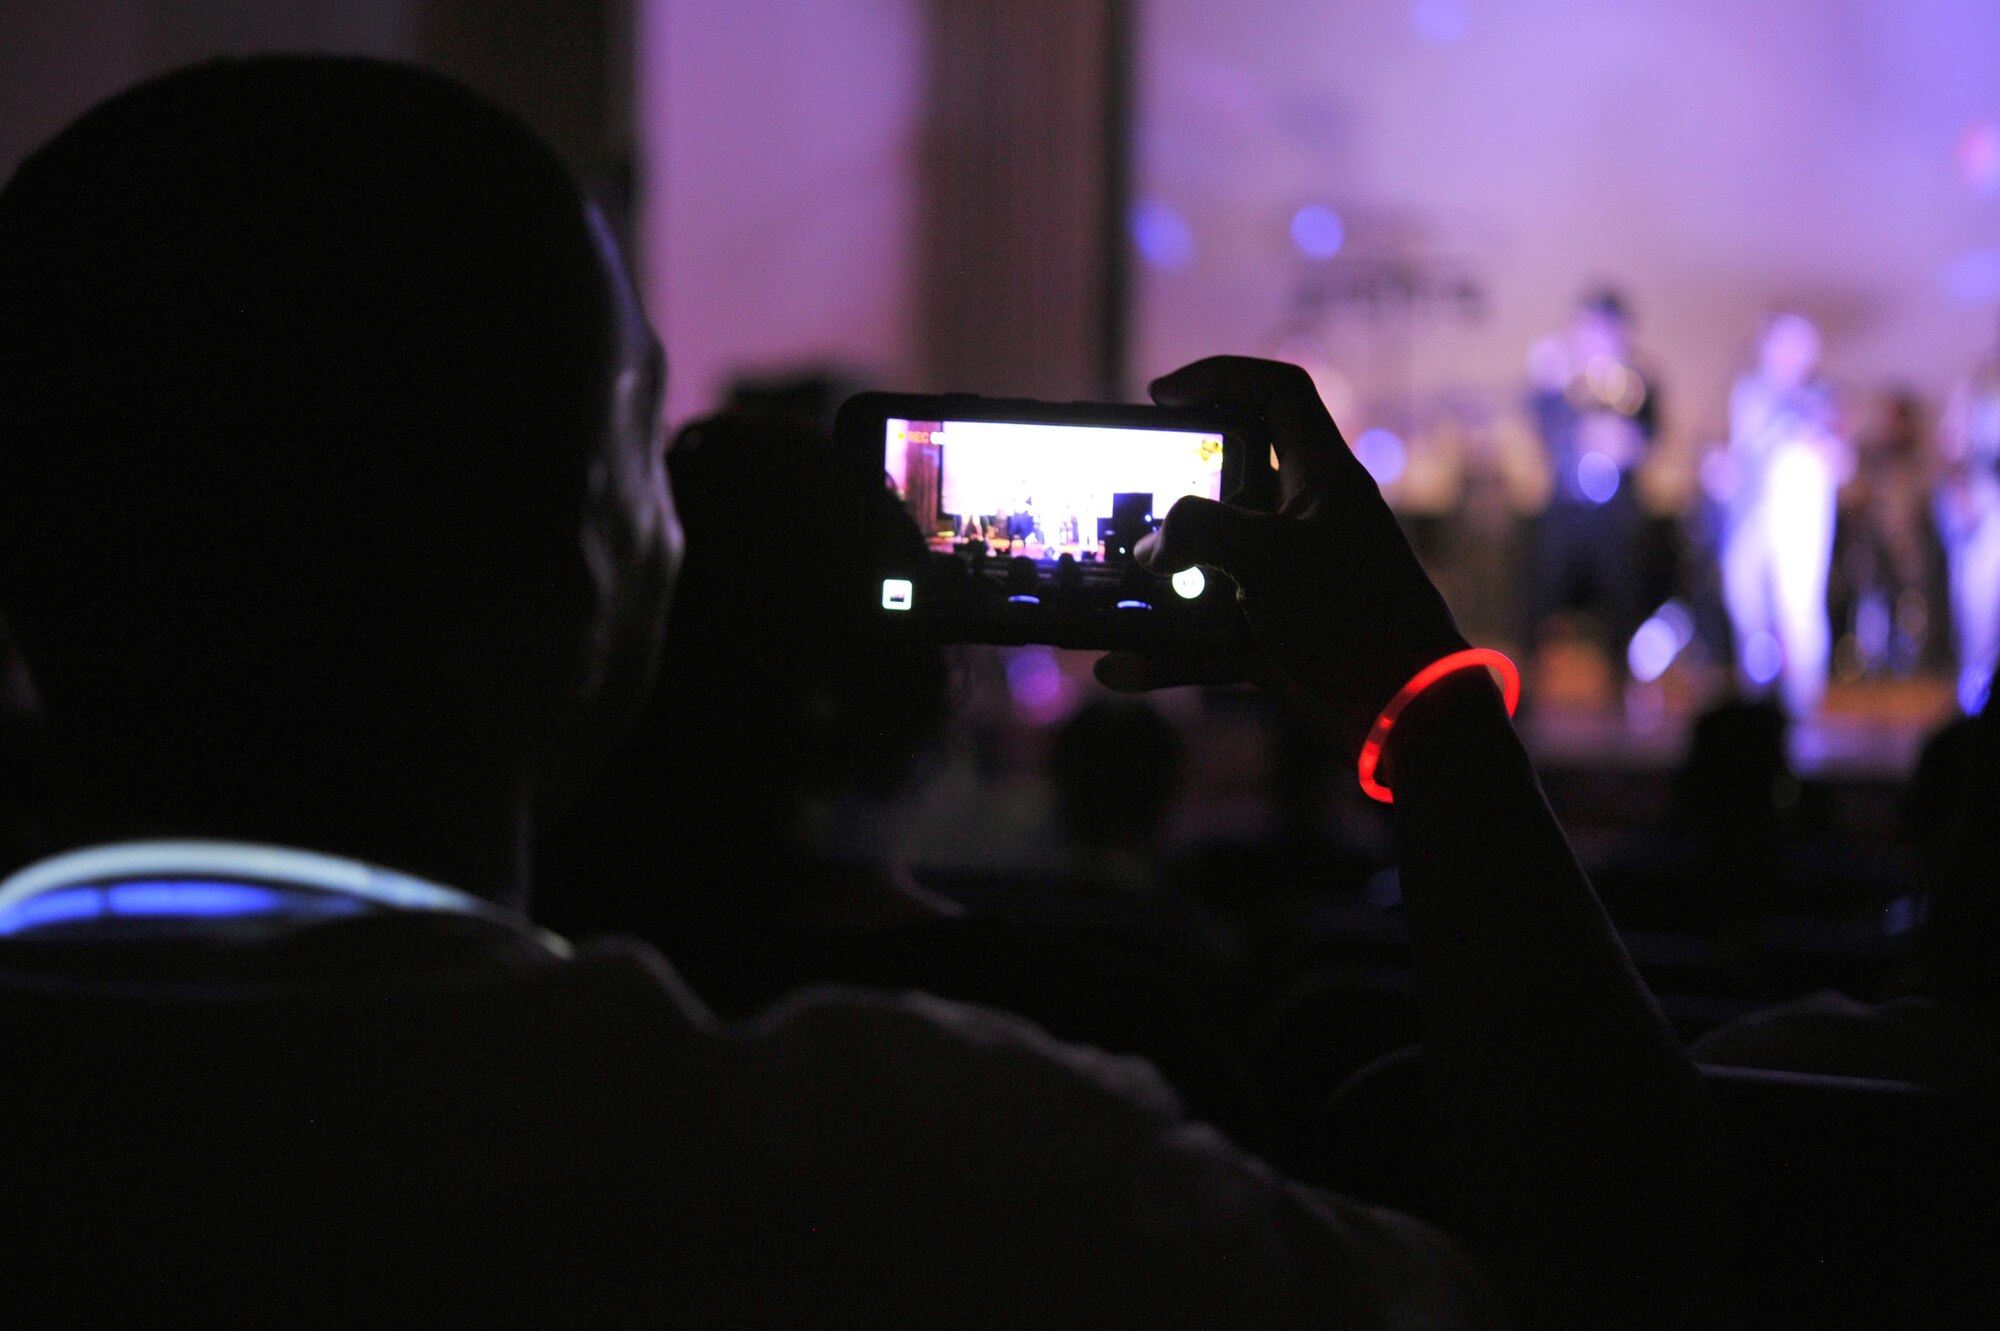 A member of the 386th Air Expeditionary Wing takes photos during a live performance from the band “Pop Rocks” at an undisclosed location in Southwest Asia, May 29, 2016. Rockfest XIV was organized and led by the 386th Expeditionary Force Support Squadron as an end-of-tour celebration for 386 AEW Marauders. (U.S. Air Force photo by Senior Airman Zachary Kee)